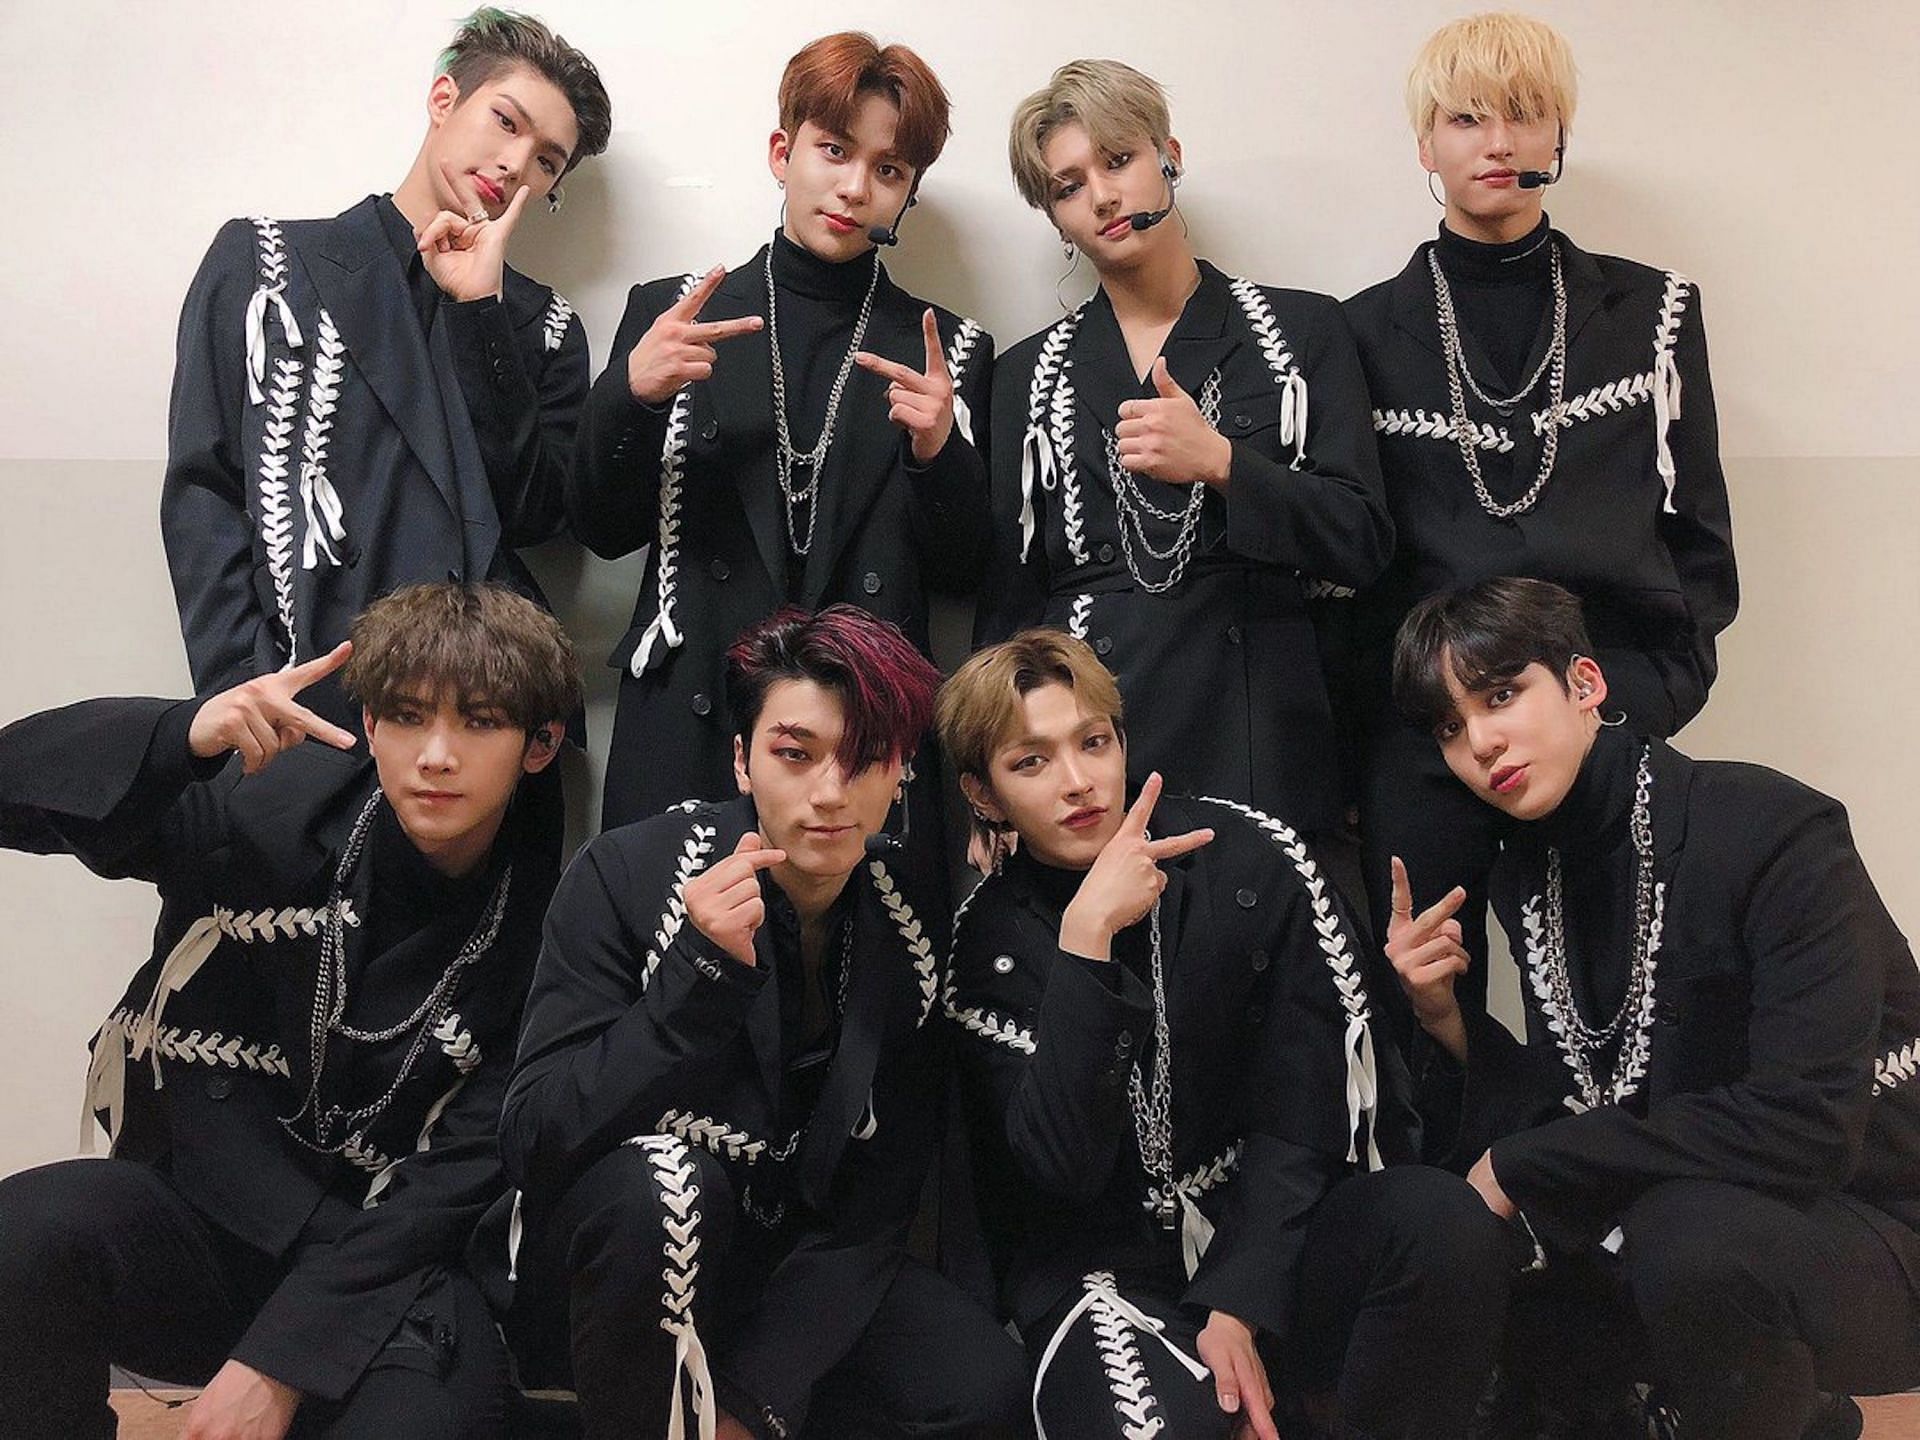 The 8-member group from KQ Entertainment are leading 4th Gen K-pop (Photo via ATEEZ/ Twitter)